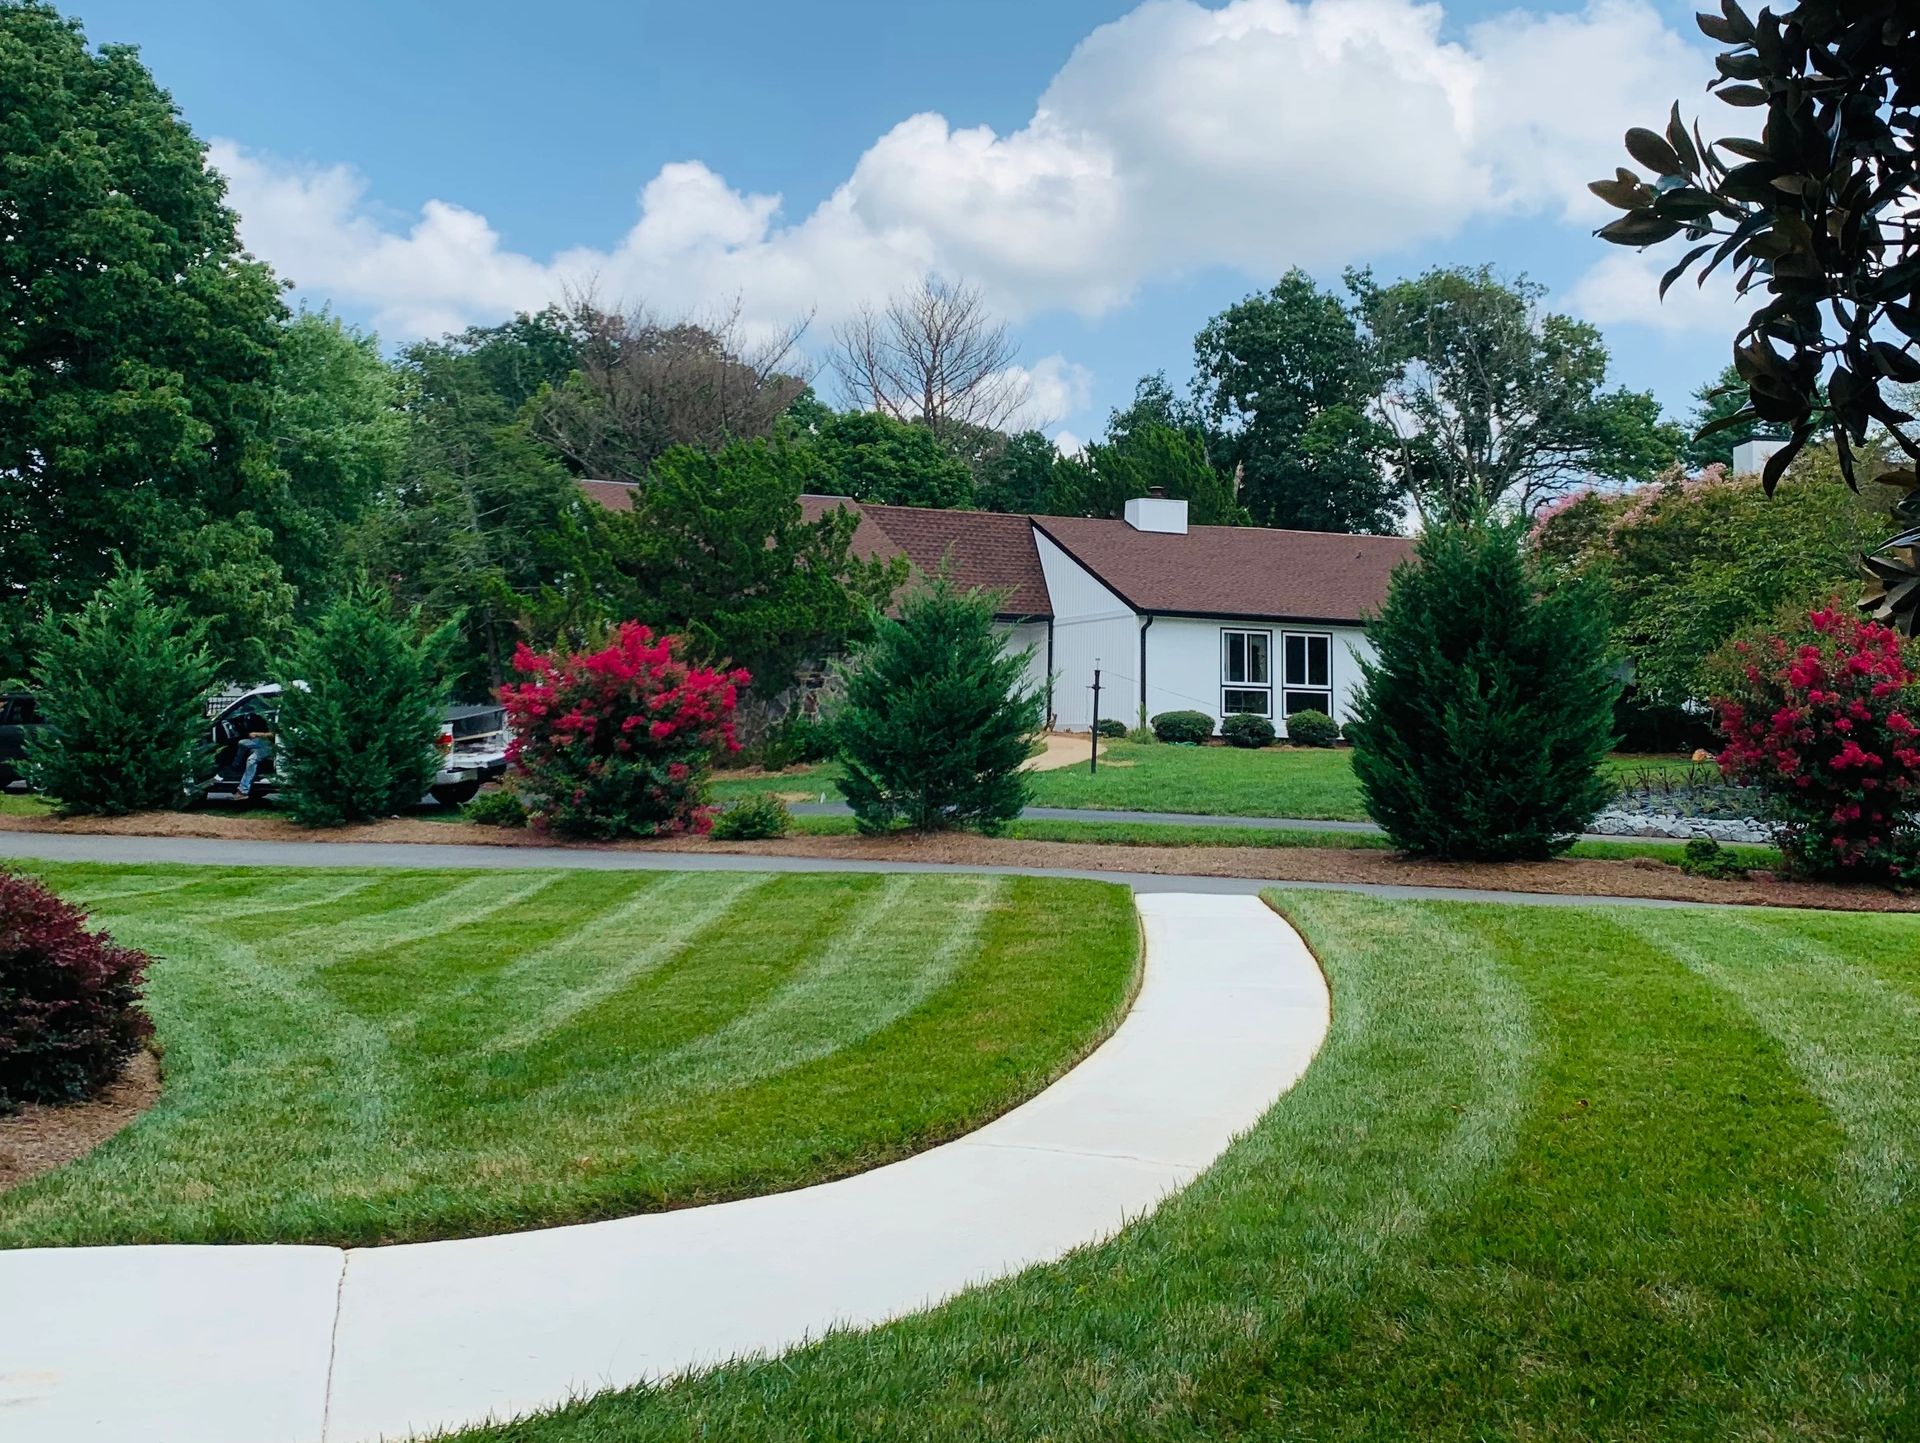 A well-manicured front lawn with curved striped patterns leading to a white house  